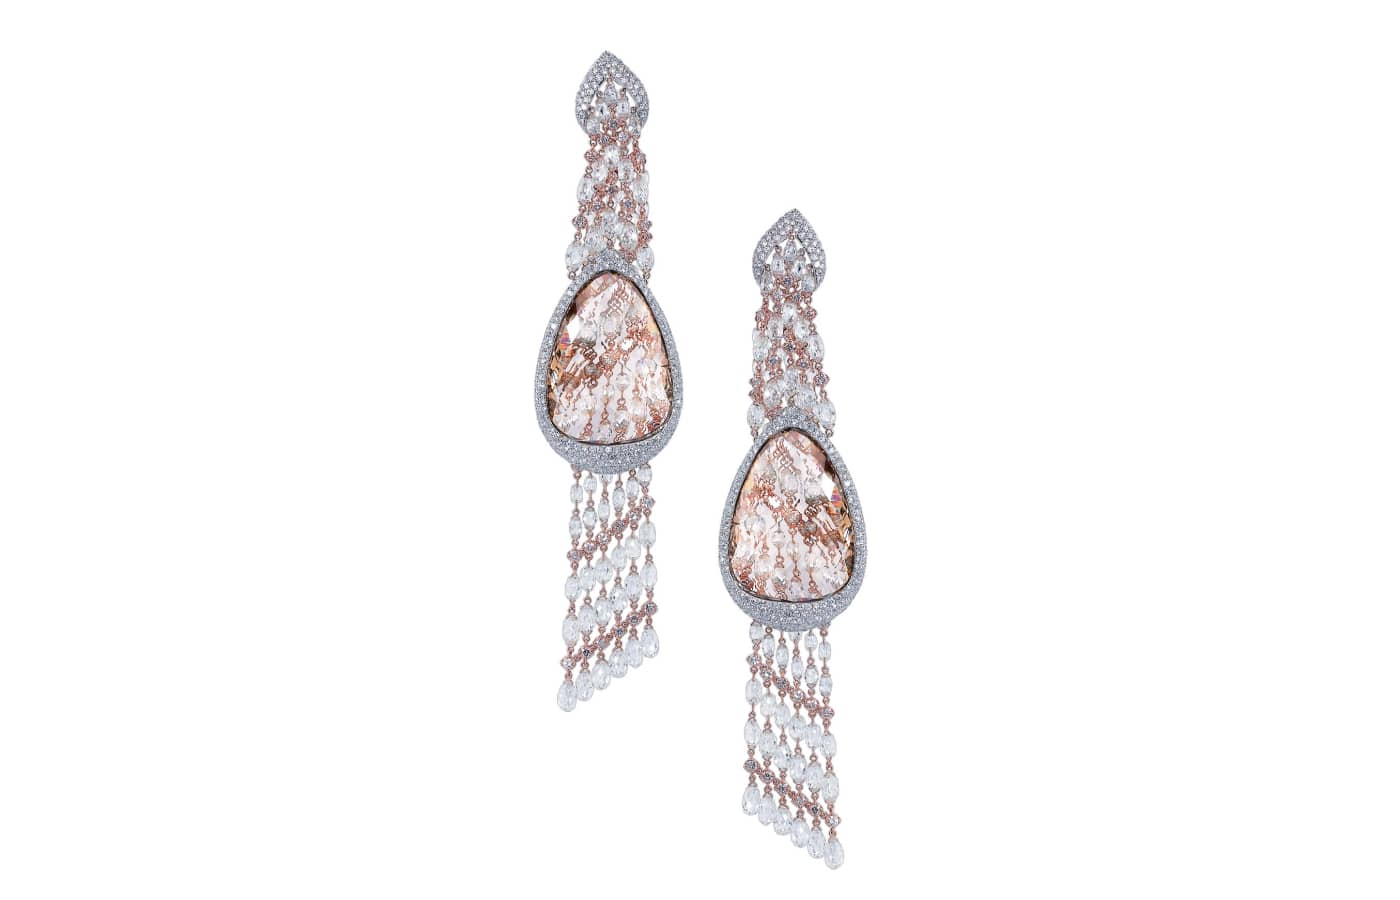 Moussaieff High jewellery earrings in white gold, featuring 42.11-cts of Natural Fancy Brown diamonds, 1.85-cts of Natural Fancy Brownish Pink diamonds, 25.43-cts of briolette diamonds and 3.63-cts of white diamonds 